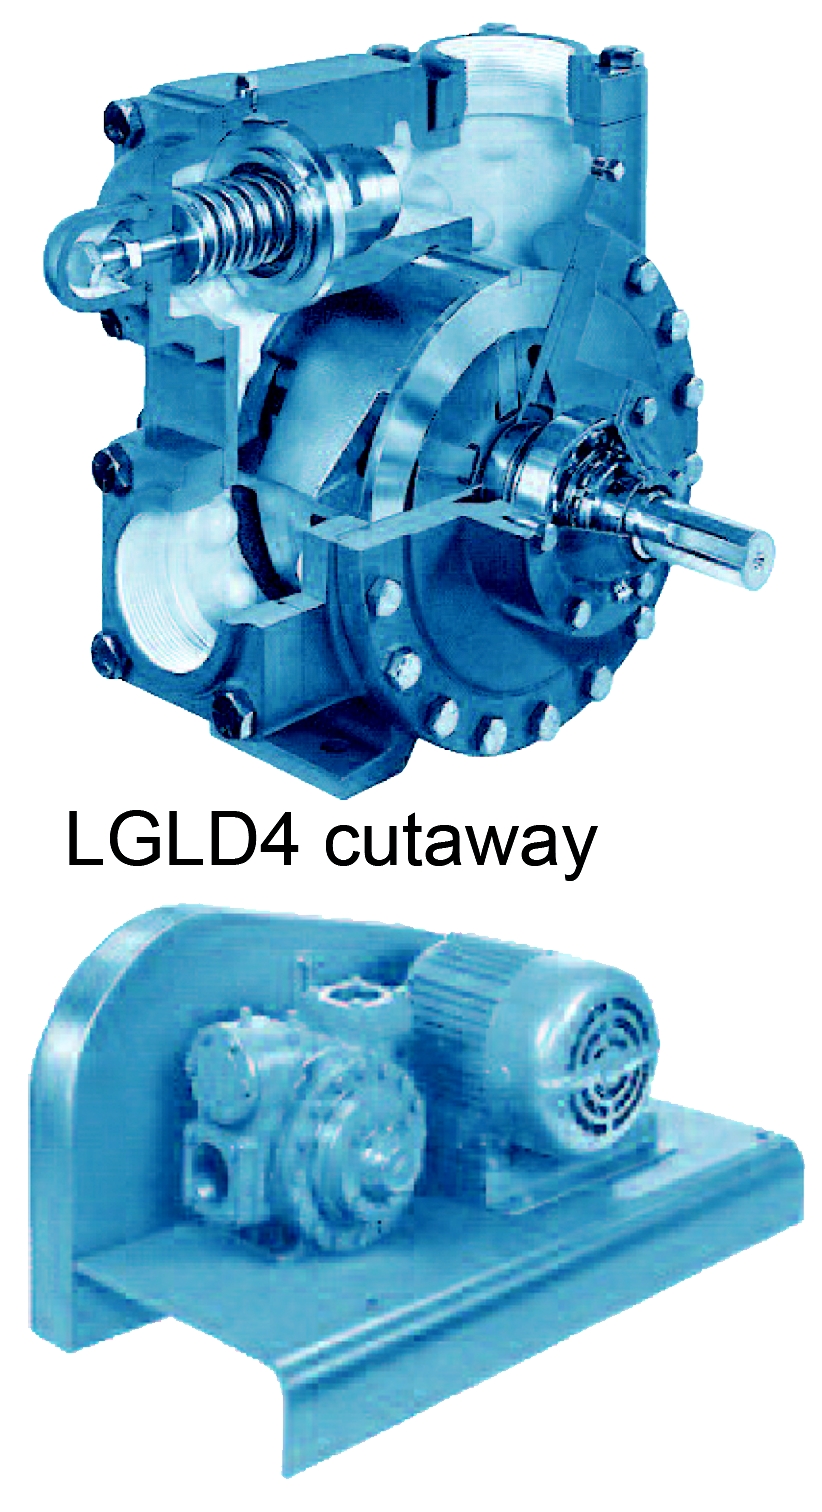 Multi-Purpose Pumps for Bulk Plants, Terminals and Truck Systems